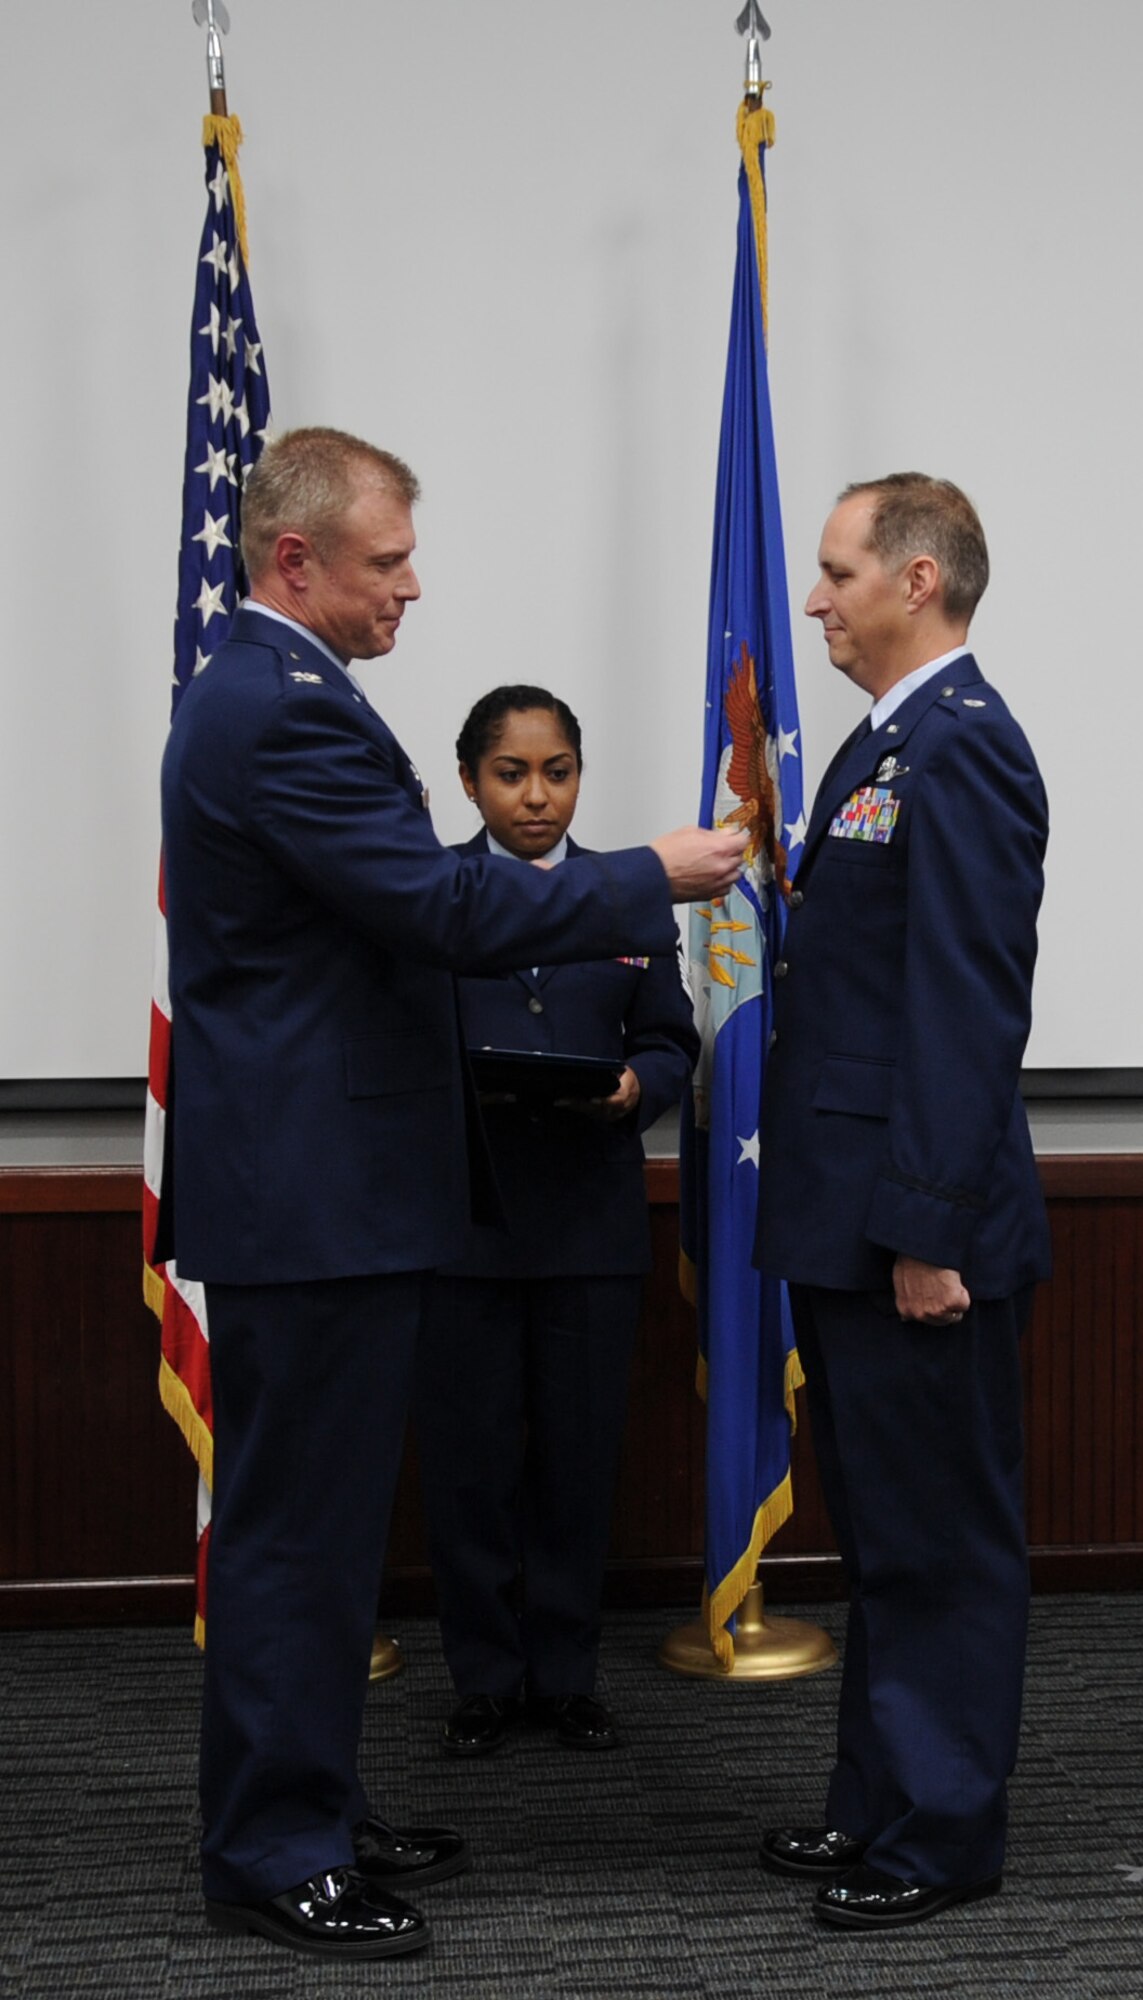 340th Flying Training Group Commander Col. Allen Duckworth presents the Meritorious Service Medal to Lt. Col. Timothy Chapman, former 340th FTG Reserve Undergraduate Flying Training Program manager, during Chapman's Aug. 29 retirement ceremony at Joint Base San Antonio-Randolph, Texas. Proffering for the ceremony is Master Sgt. Natasha Todd, group personnel specialist. (U.S. Air Force photo by Debbie Gildea)